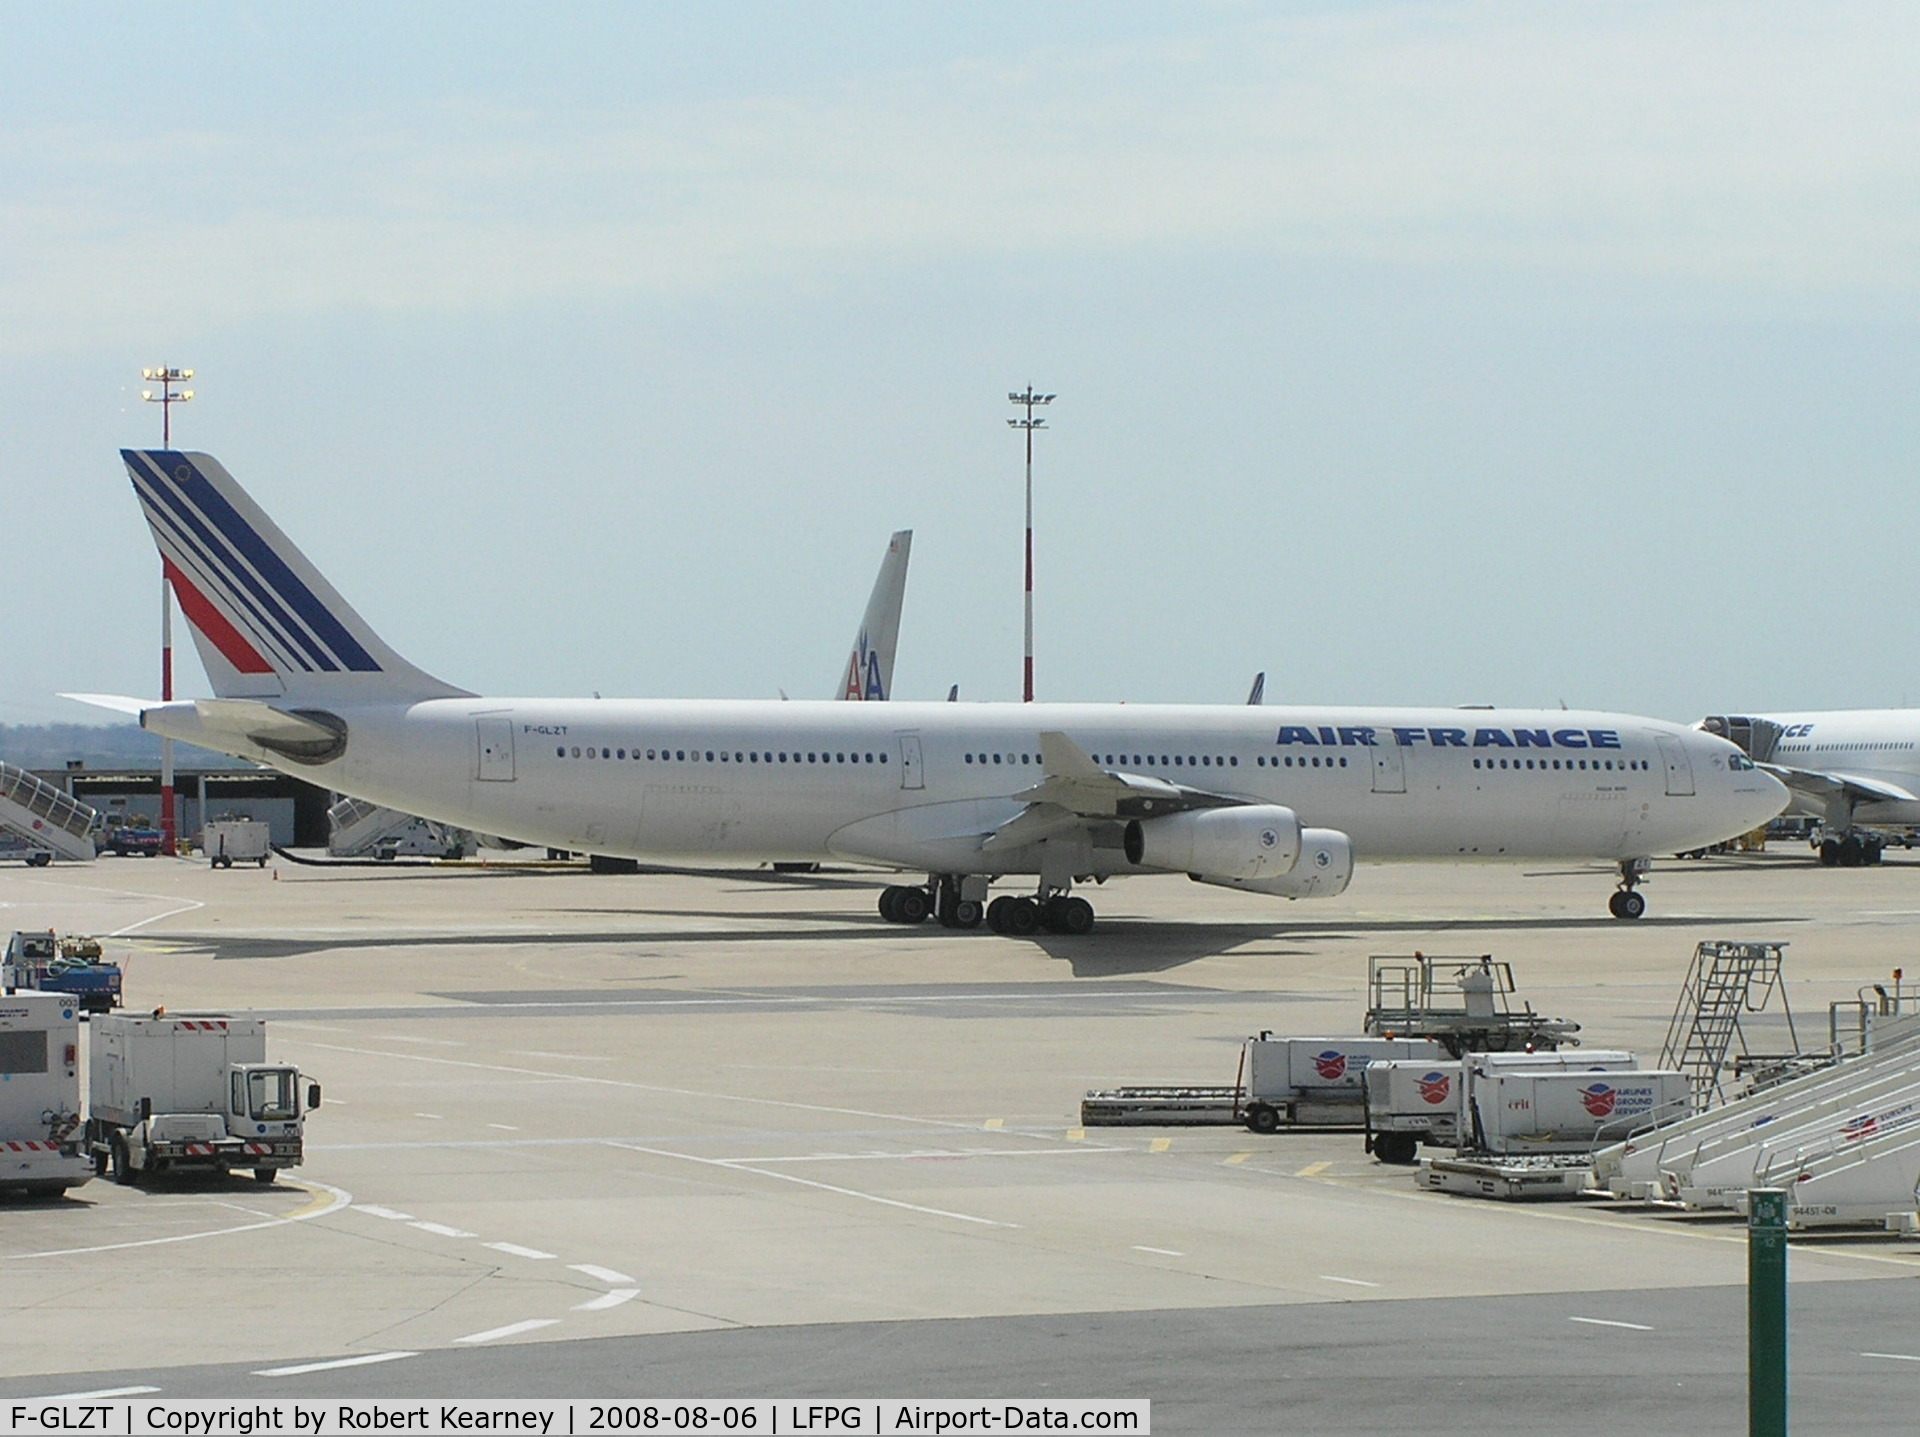 F-GLZT, 2000 Airbus A340-313X C/N 319, Air France heading for take-off